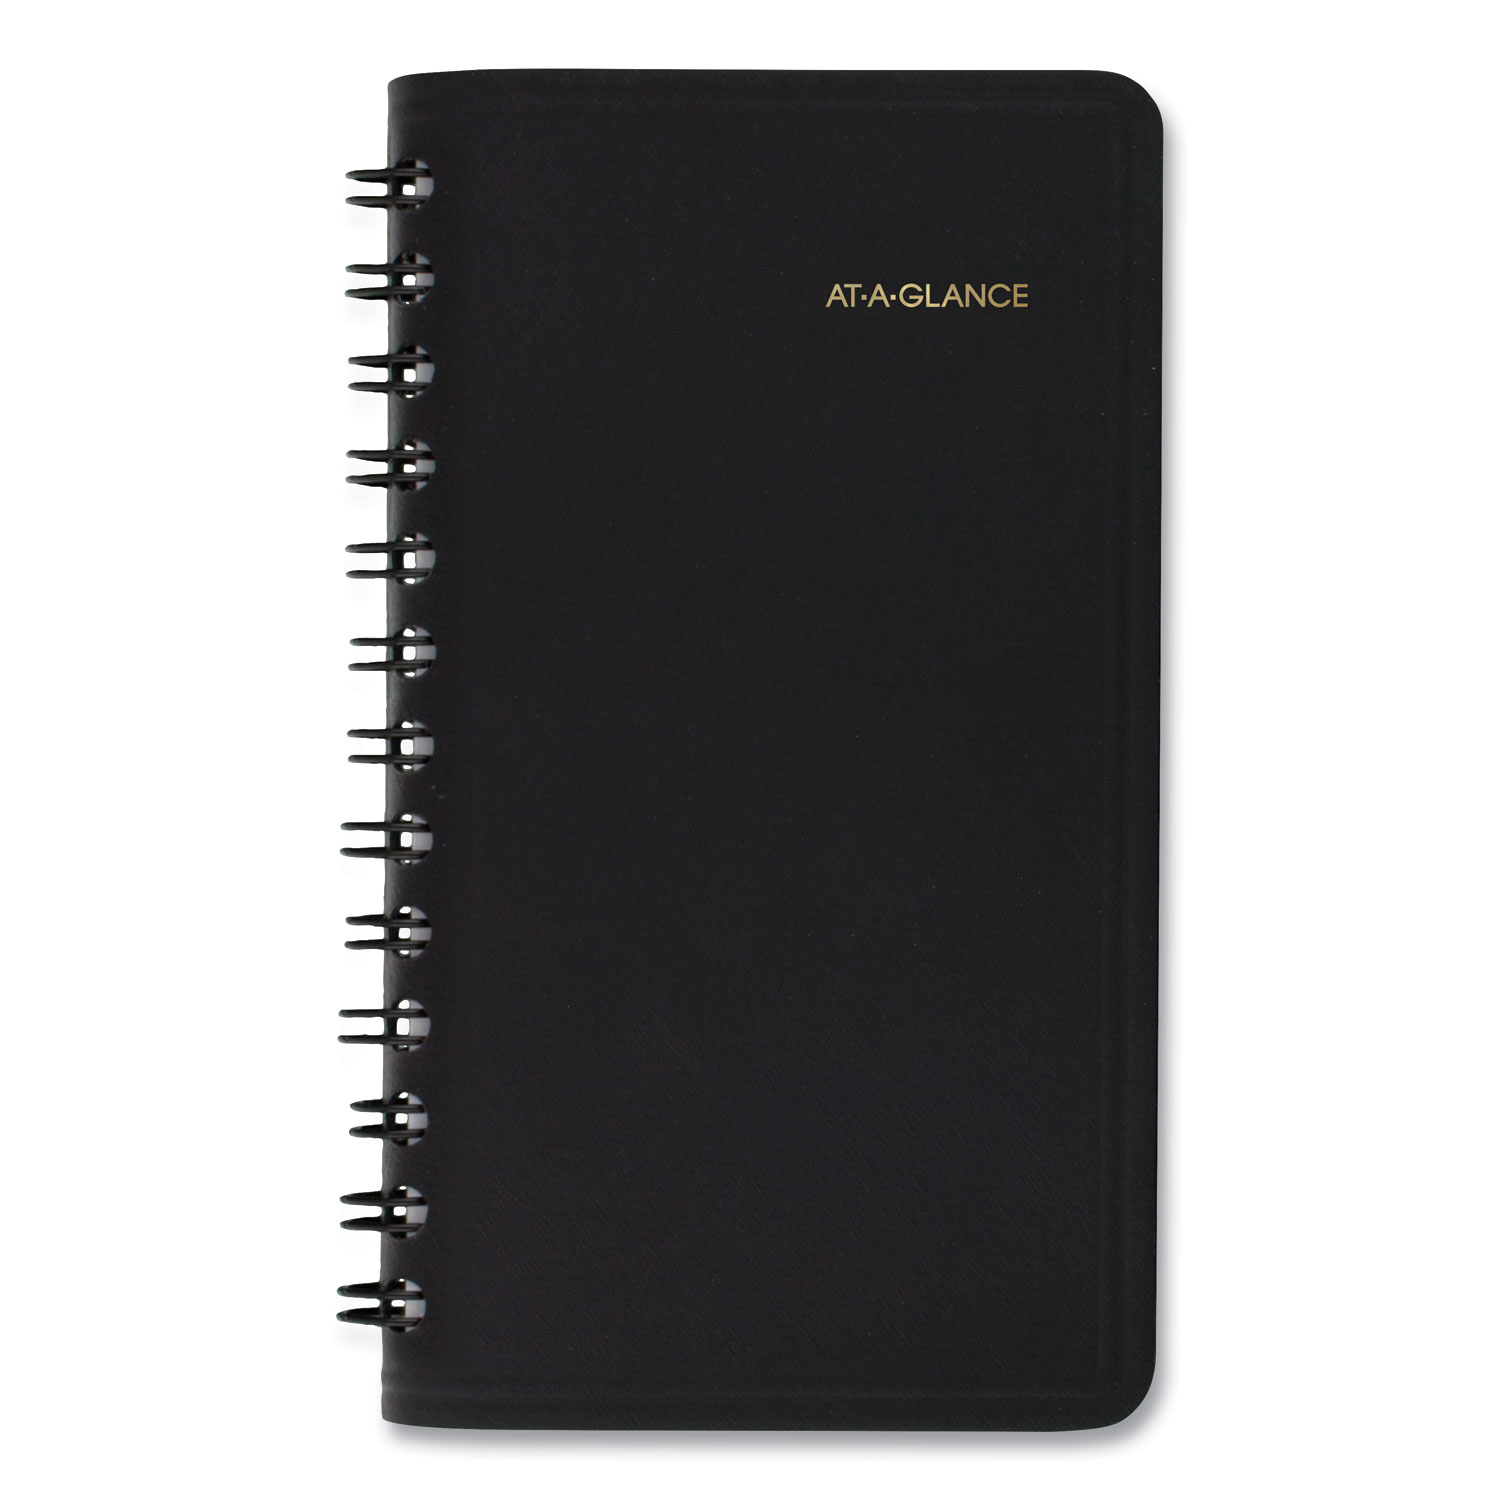  AT-A-GLANCE 7003505 Weekly Planner, 4 1/2 x 2 1/2, Black, 2020 (AAG7003505) 